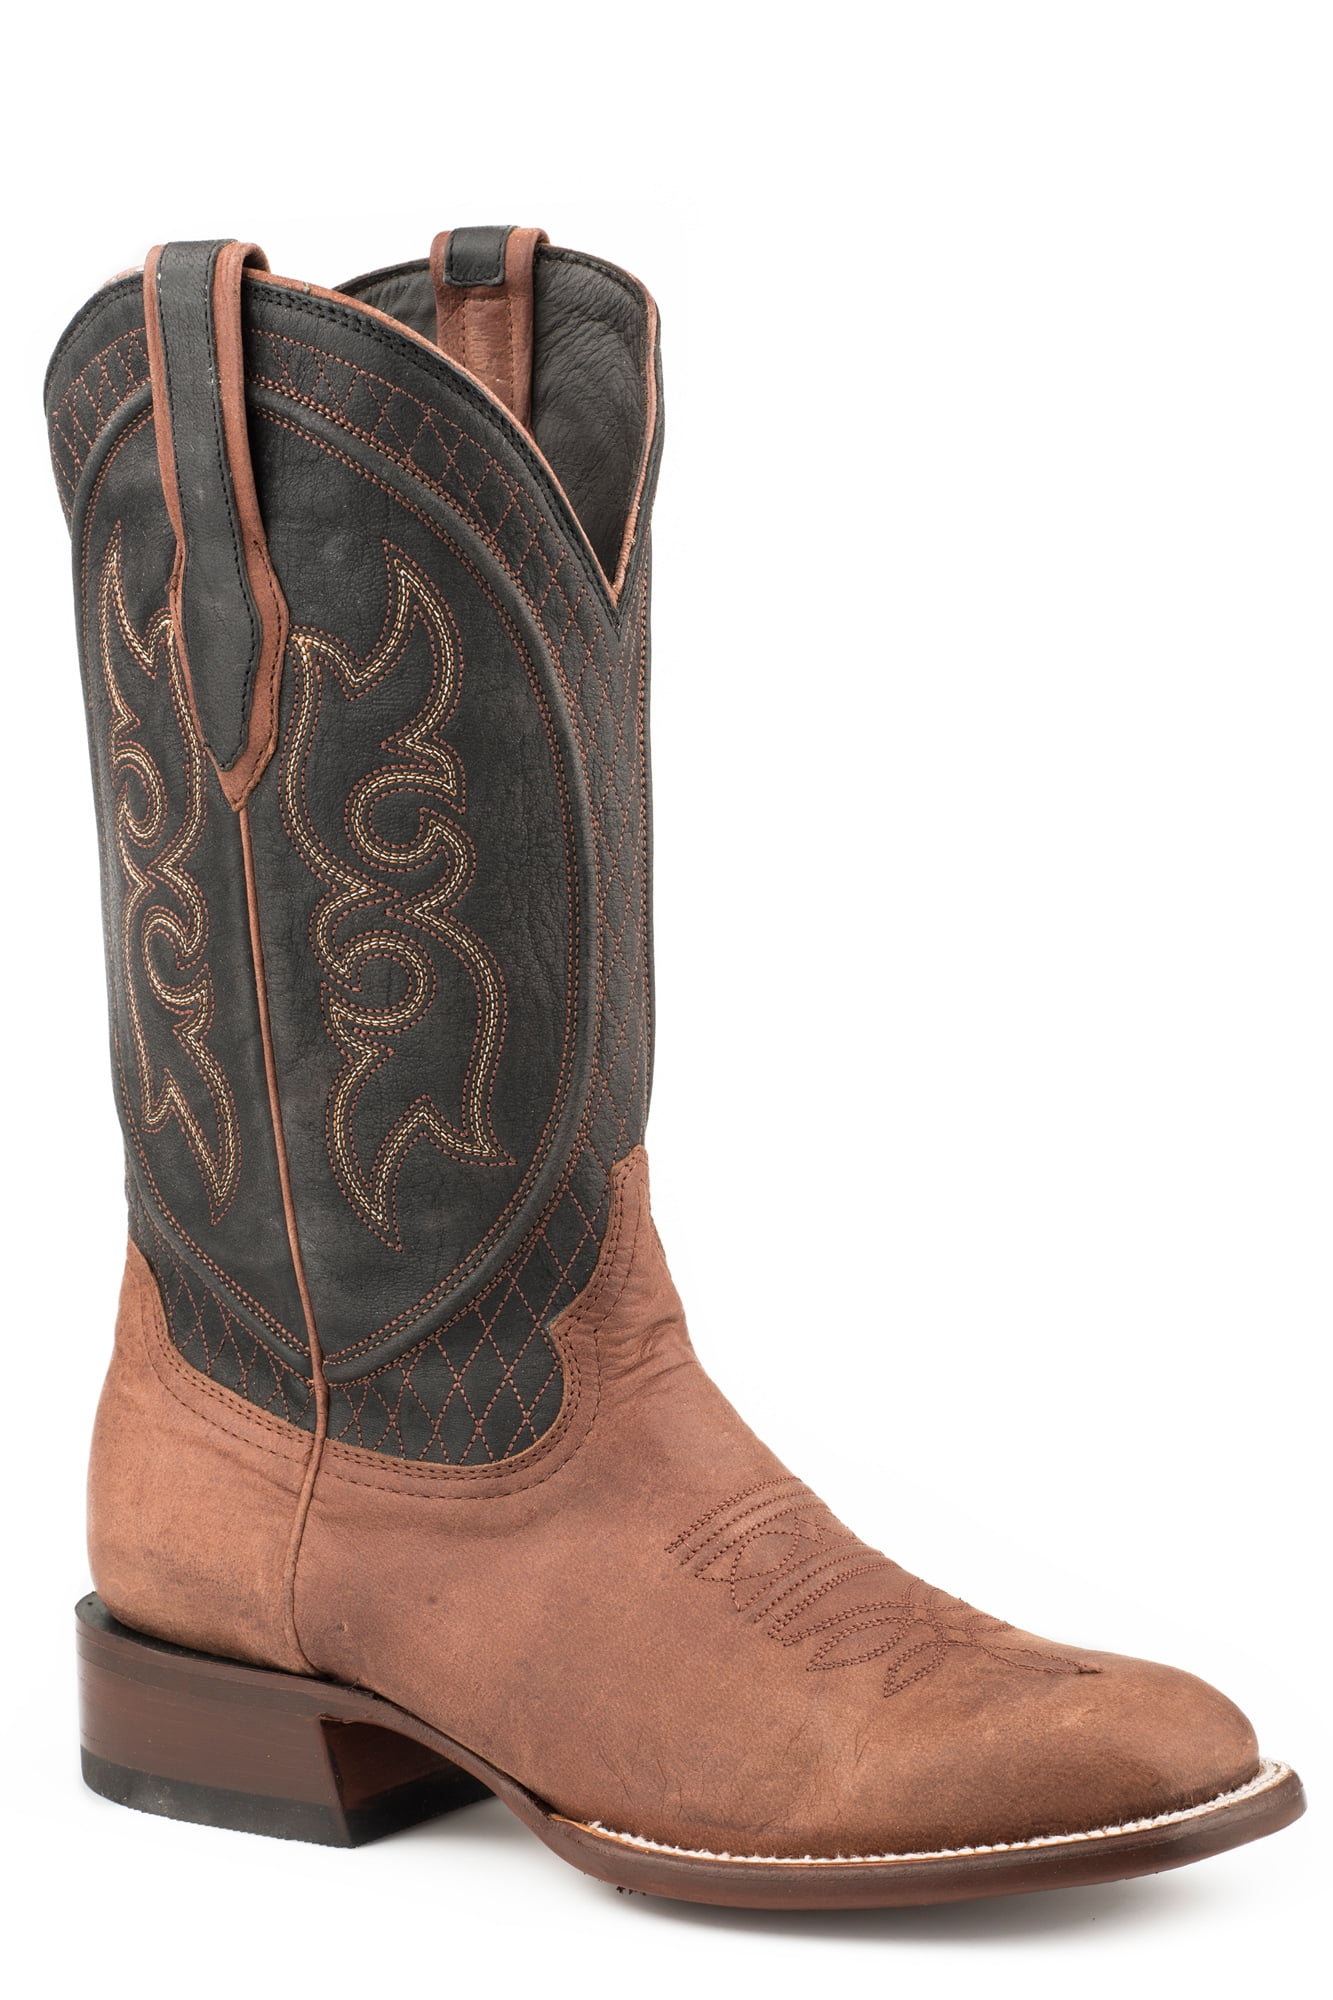 Stetson Mens Brown/Black Leather Westby 